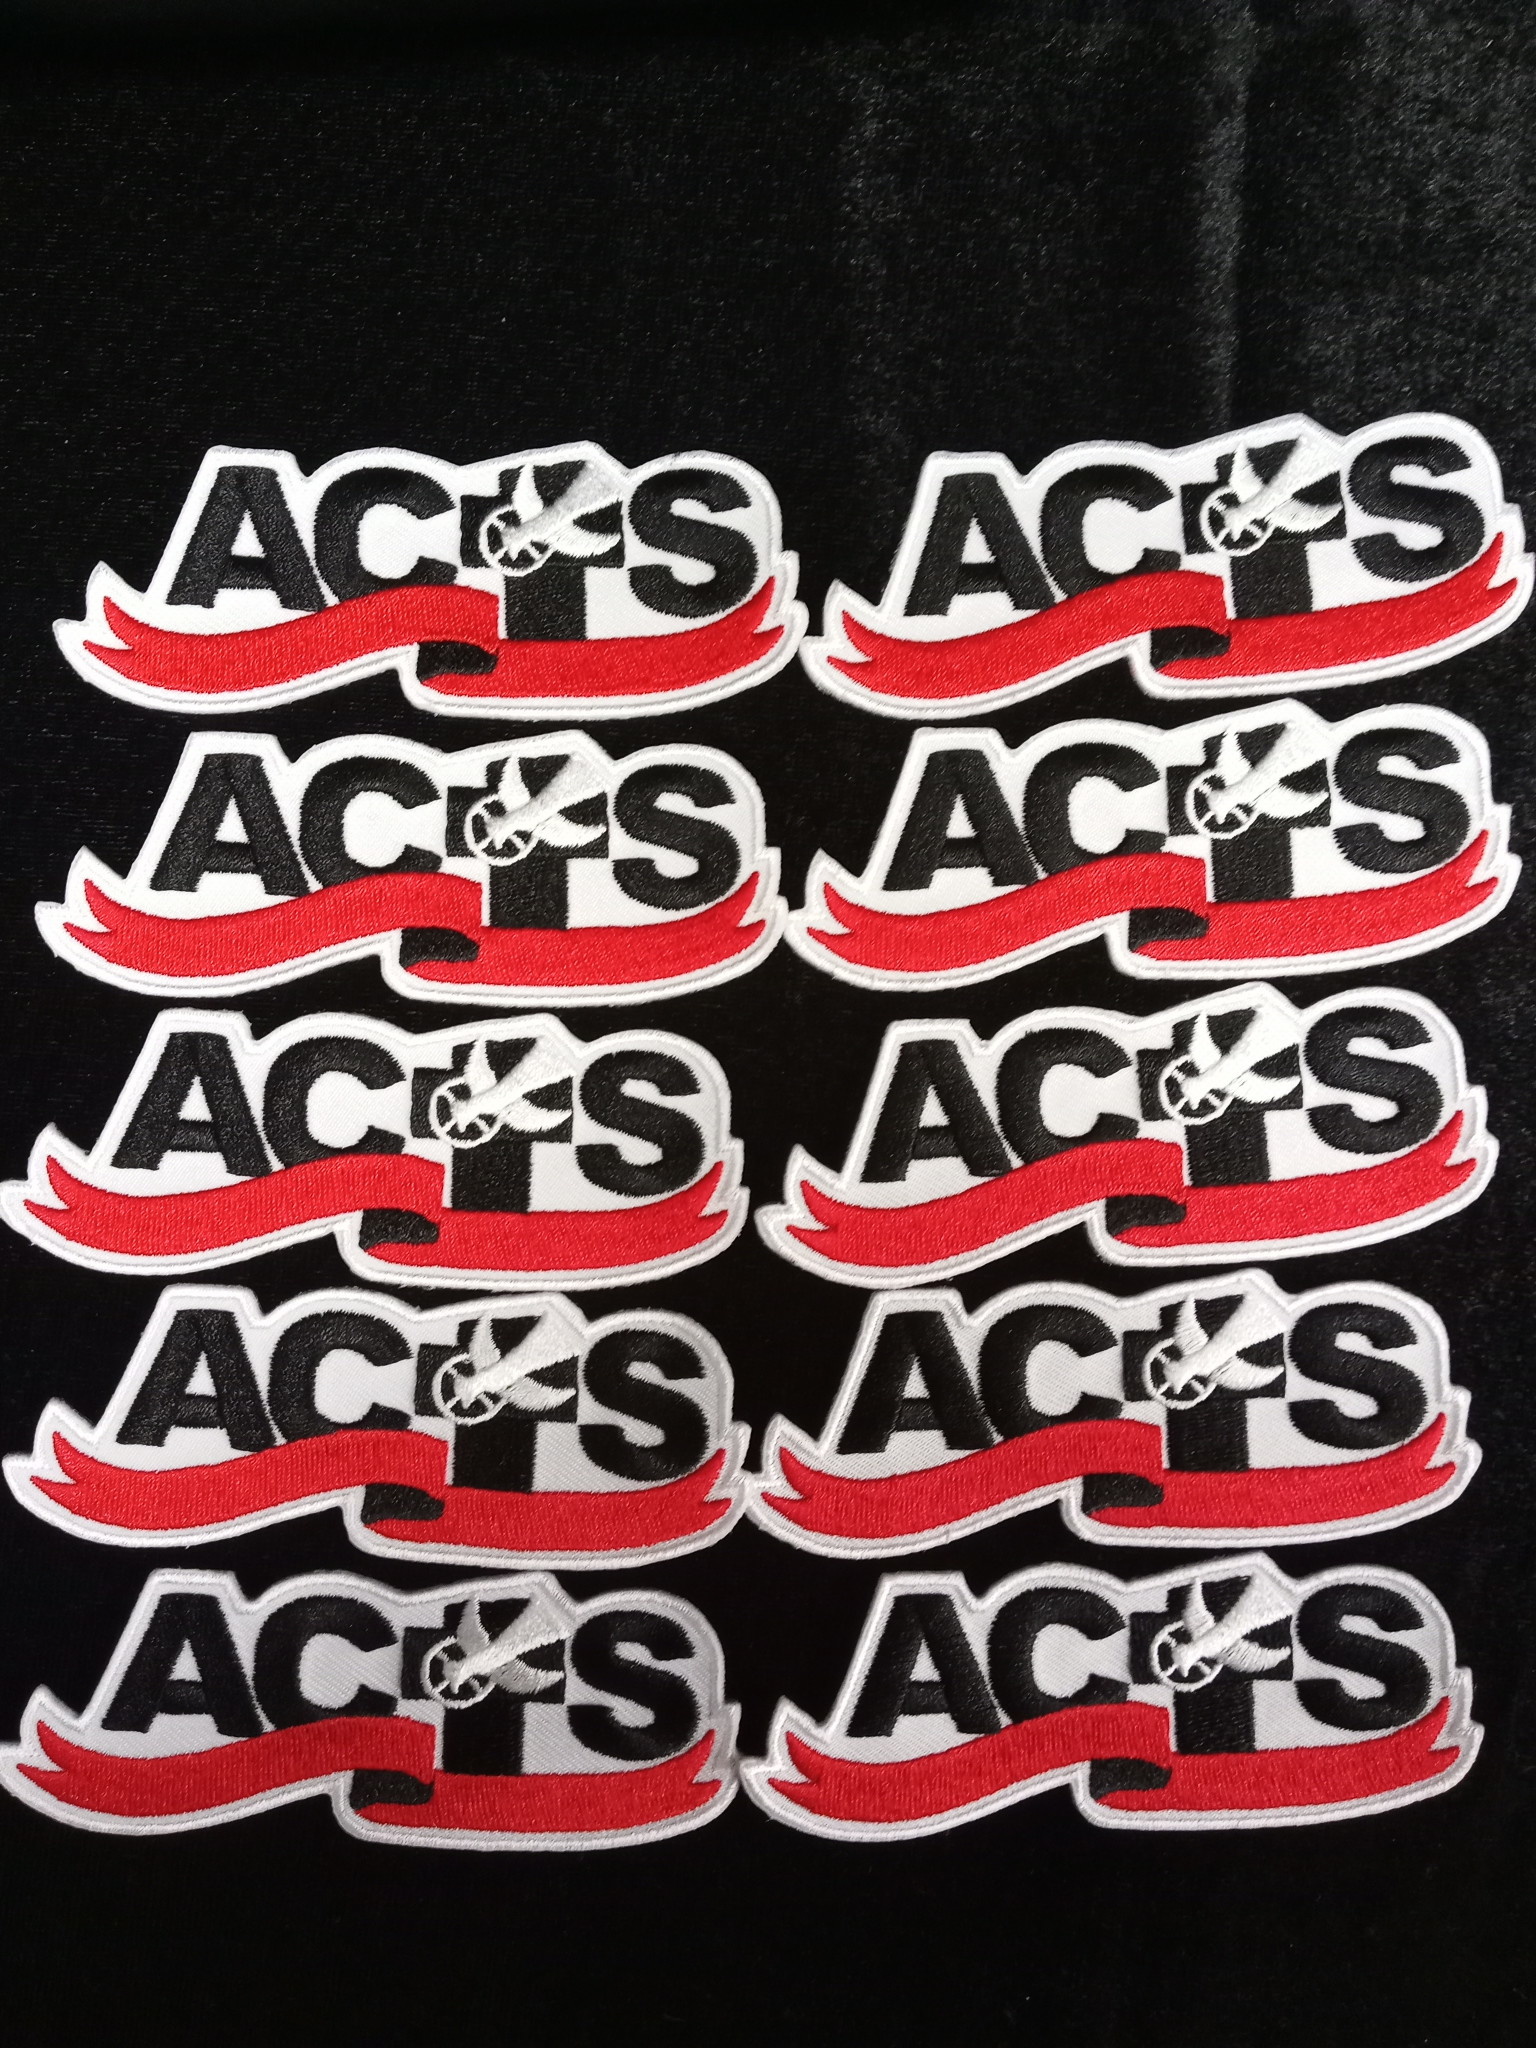 ACTS Ribbon Logo Patch 10 Pack Retreat Special